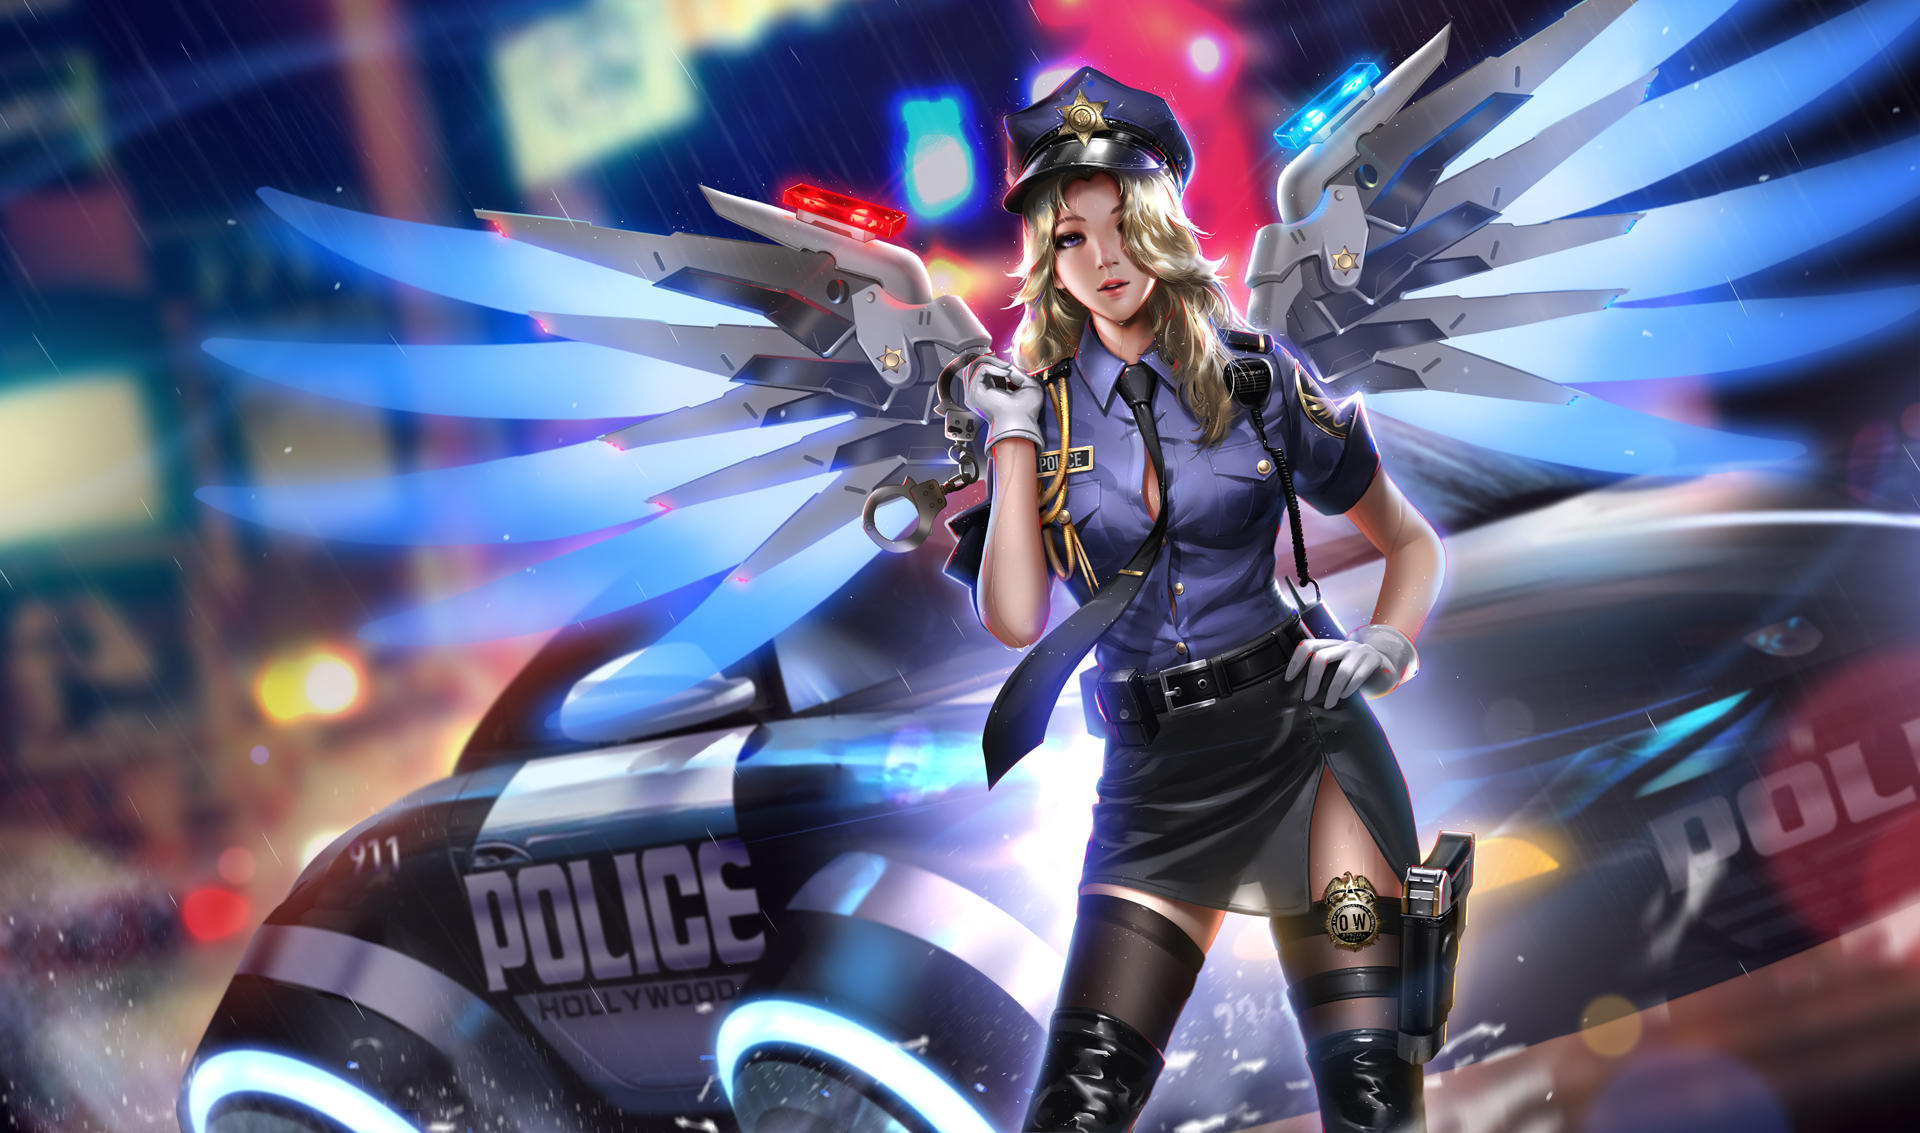 Officer Mercy by Liang-Xing on DeviantArt